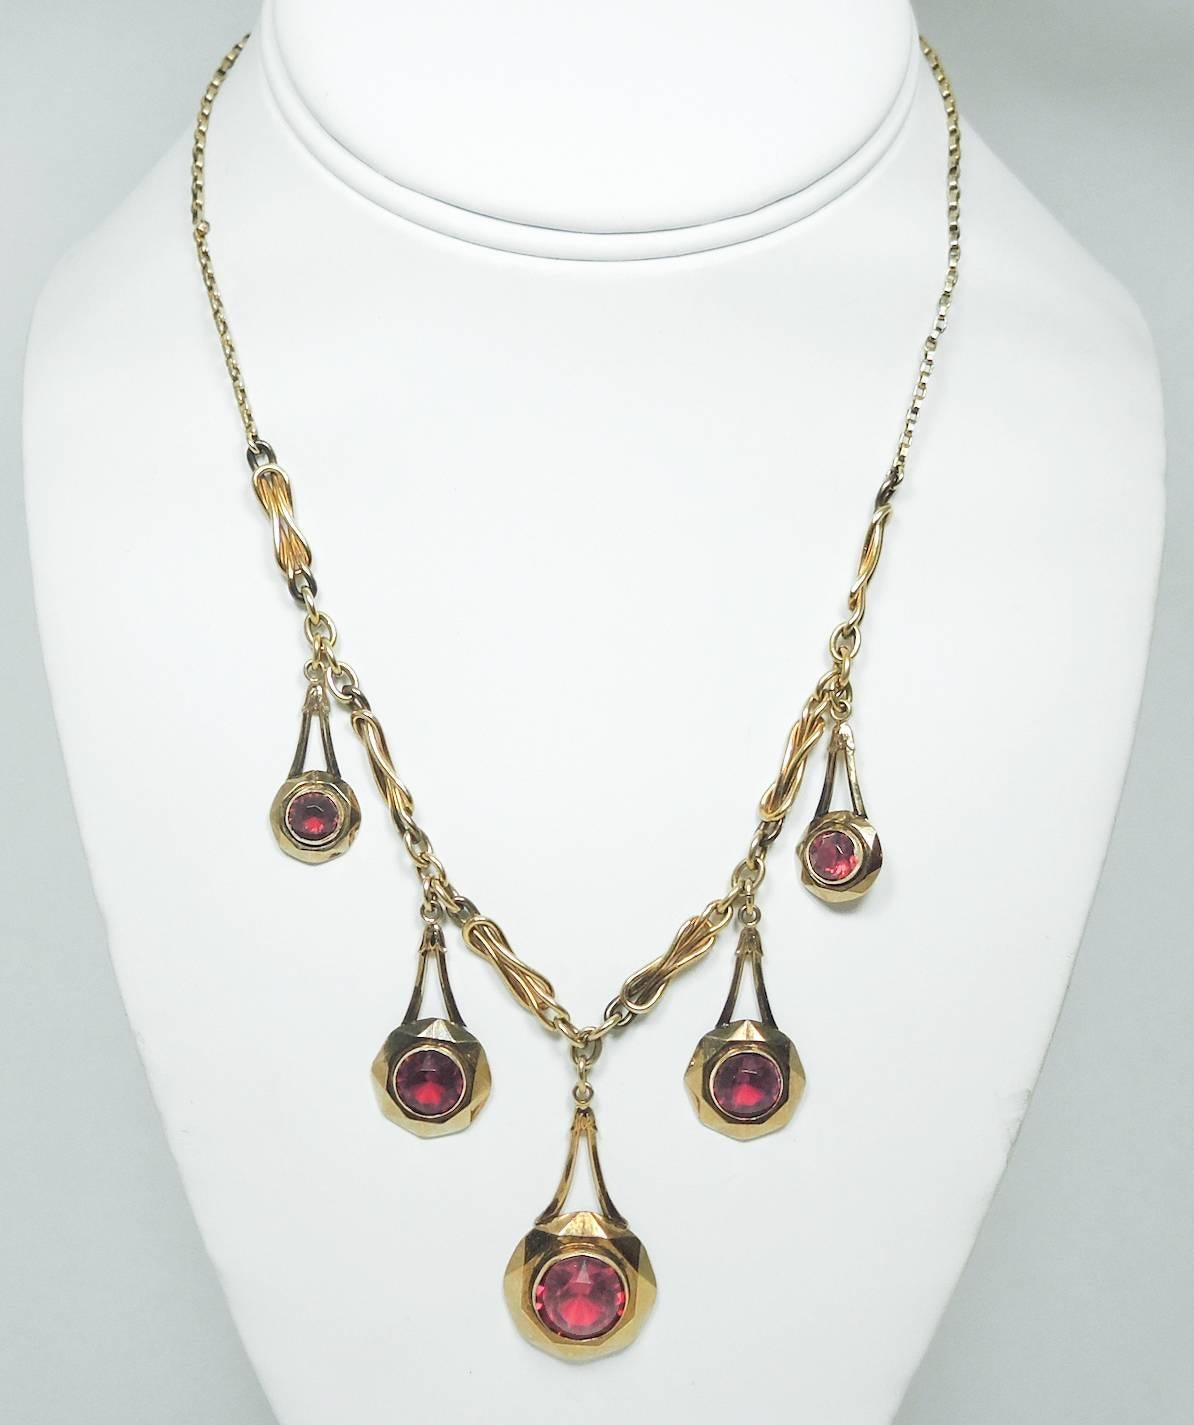 This vintage features five teardrop shaped drops with red rhinestone accents in a gold-tone setting. The necklace has a delicate link necklace with a spring ring clasp. It measures 16” x 1/8” with the longest center drop measuring 1-1/2” and is in